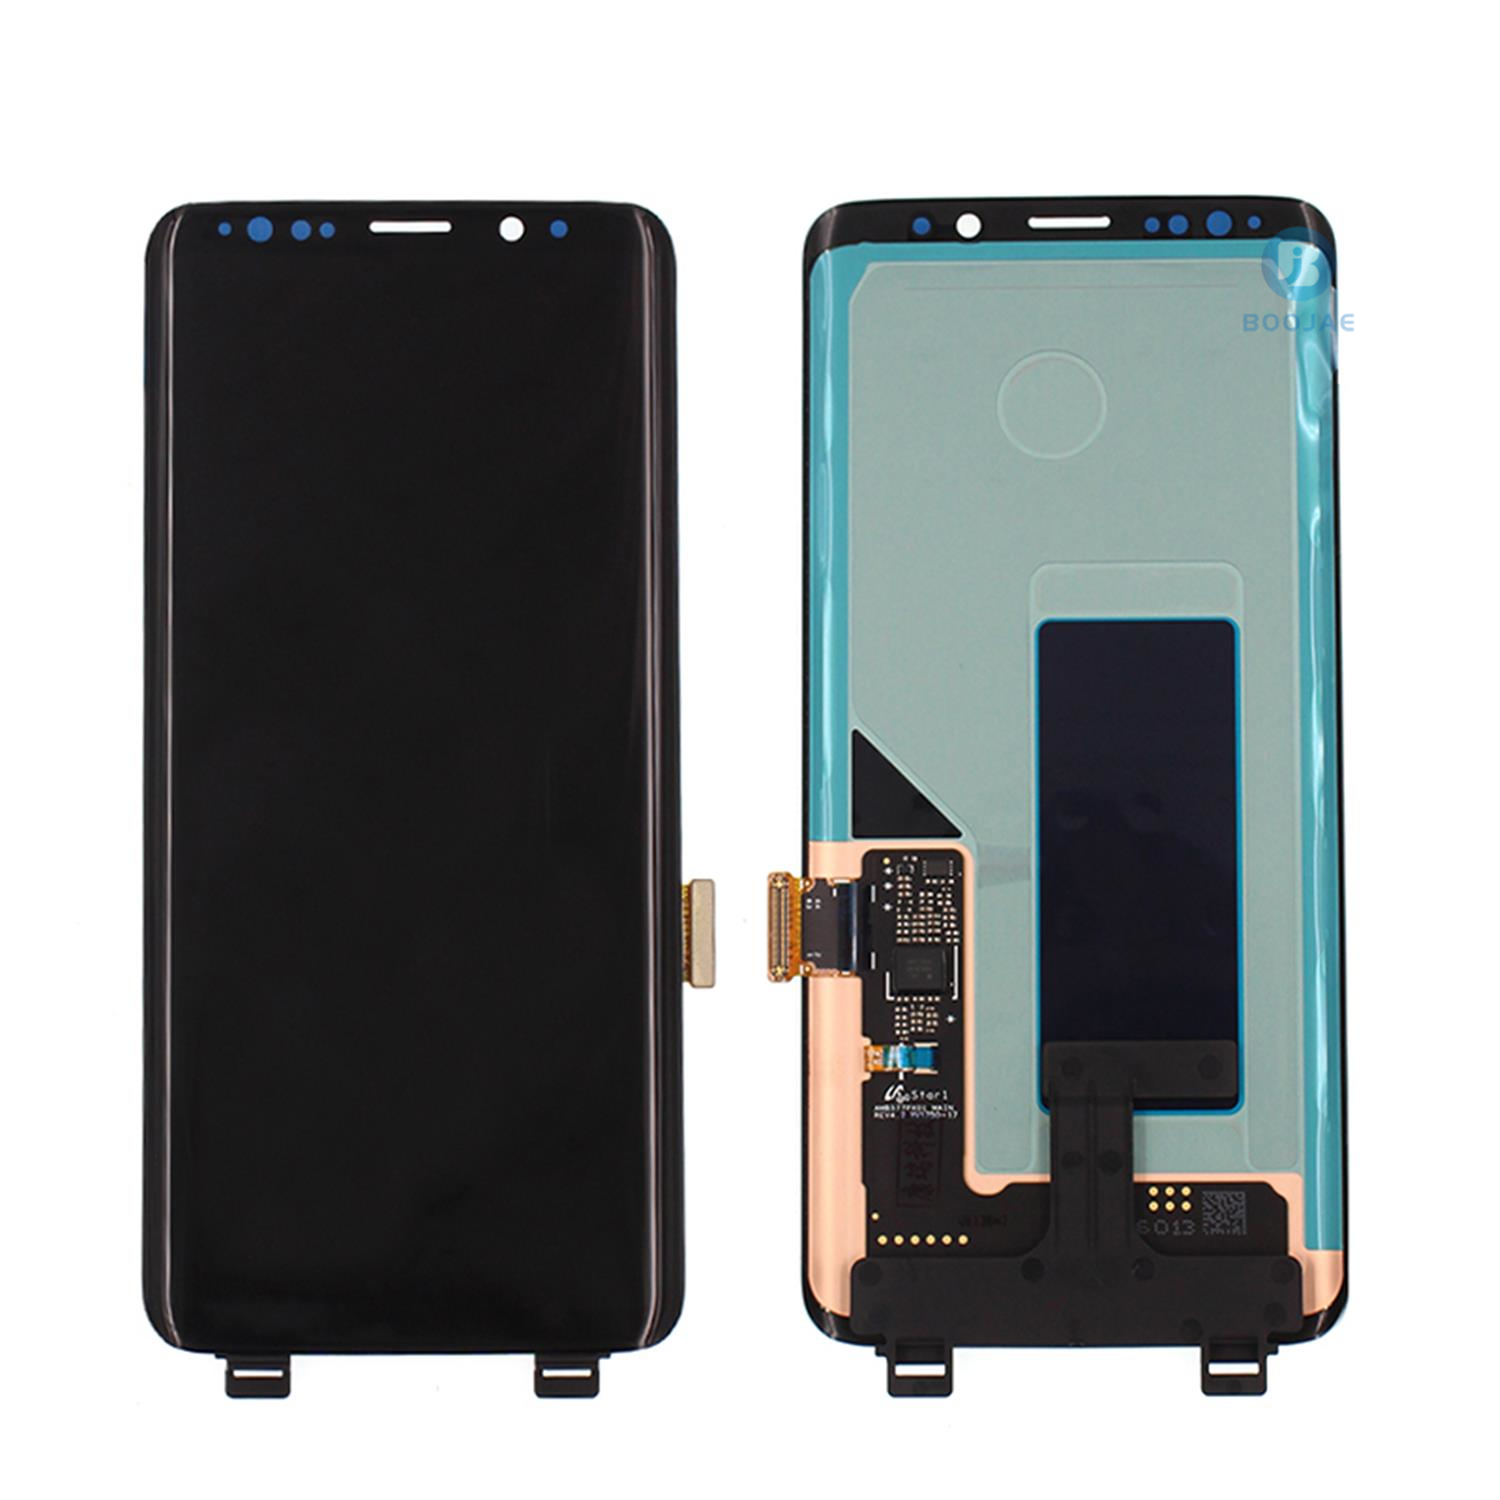 Samsung Galaxy S9 LCD Screen Display and Touch Panel Digitizer Assembly Replacement